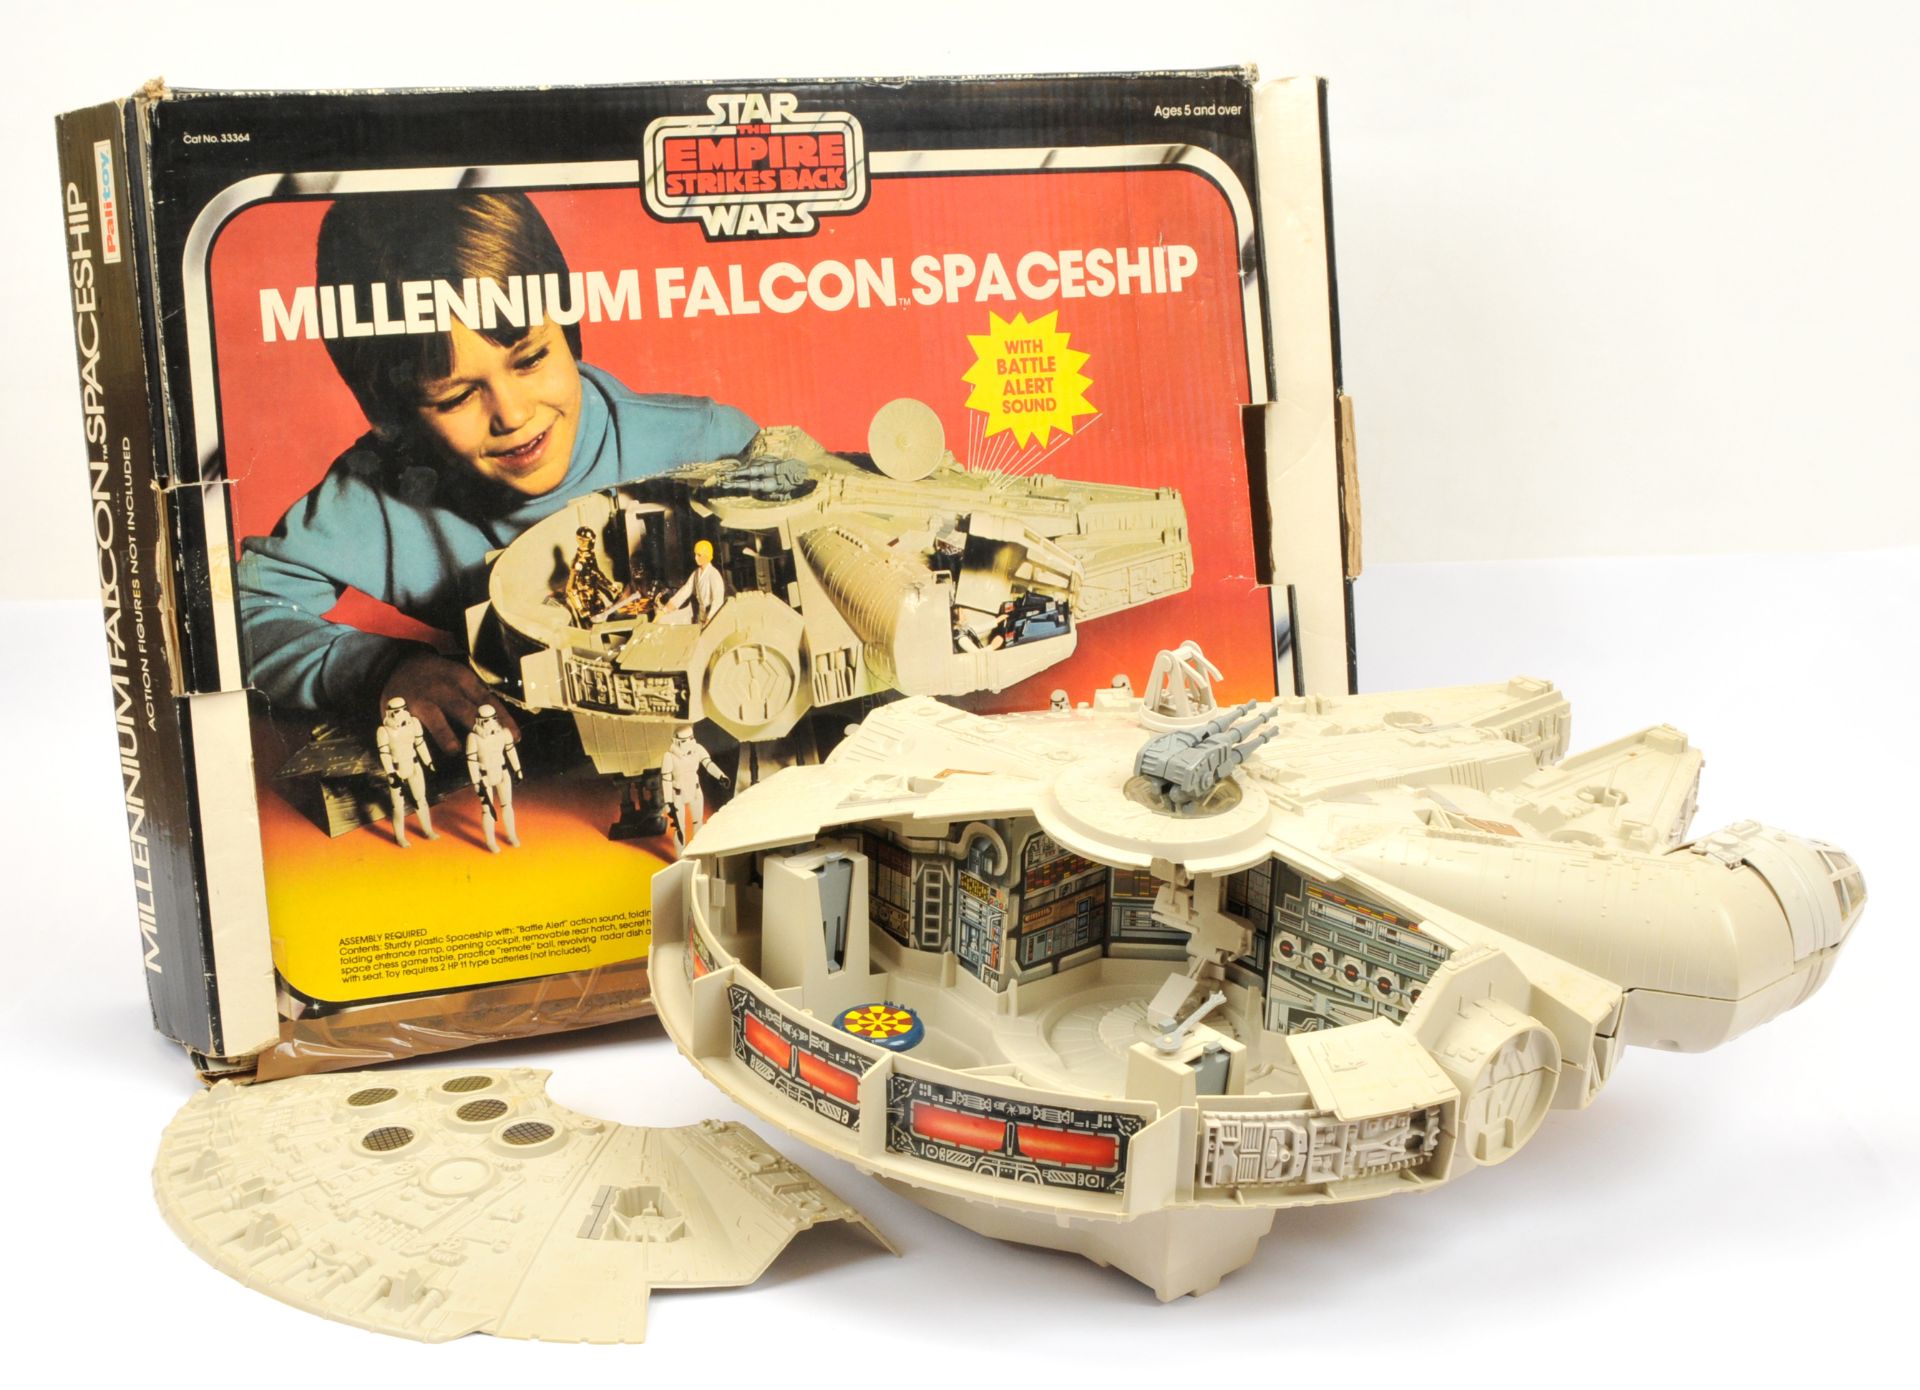 Palitoy Star Wars vintage The Empire Strikes Back Millennium Falcon - Image 2 of 2